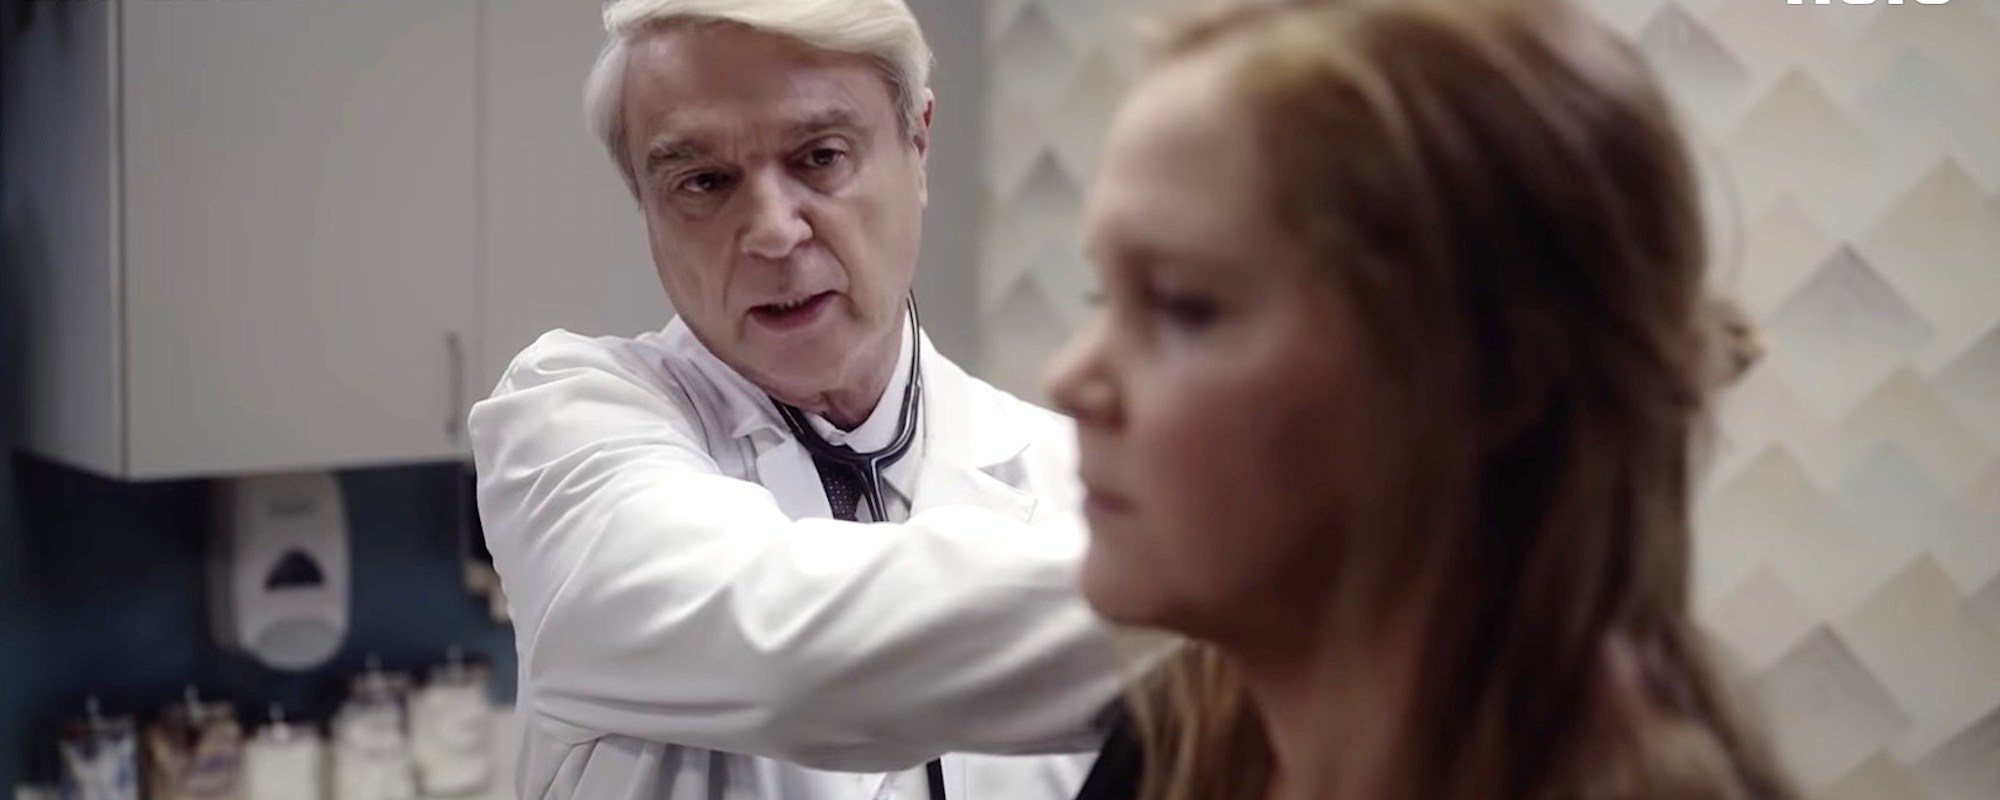 David Byrne Stars in New Amy Schumer Series ‘Life & Beth’